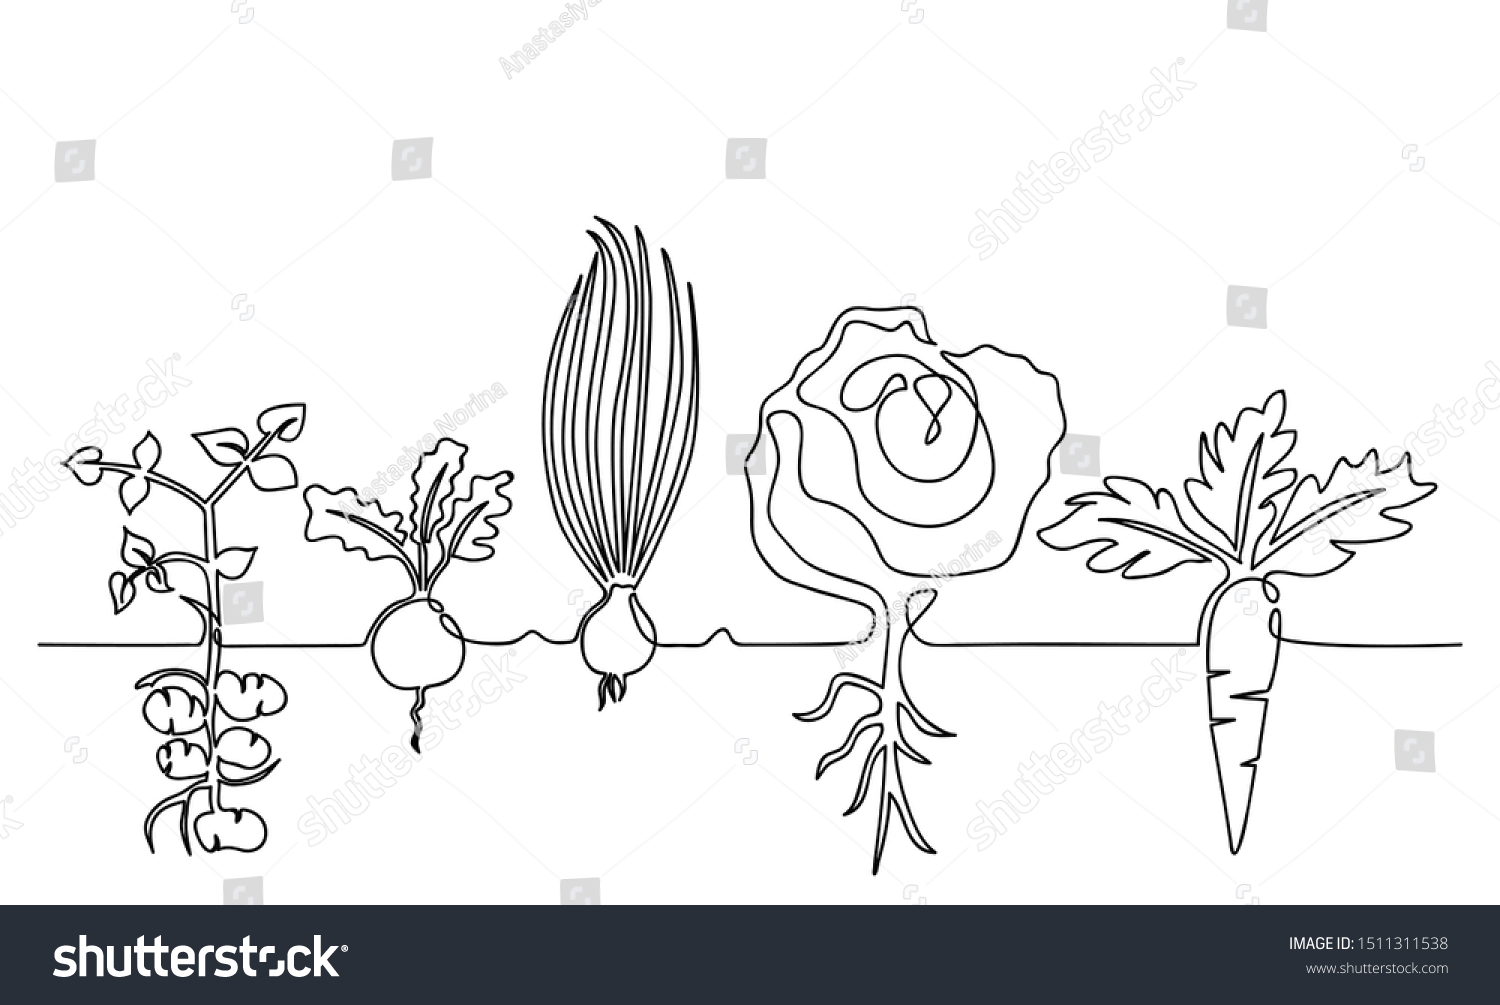 One lines drawing vector ripe vegetables set, black and white sketch of a family of plants growing in the ground, isolated on a white background. Edible harvest one line hand drawn illustration #1511311538